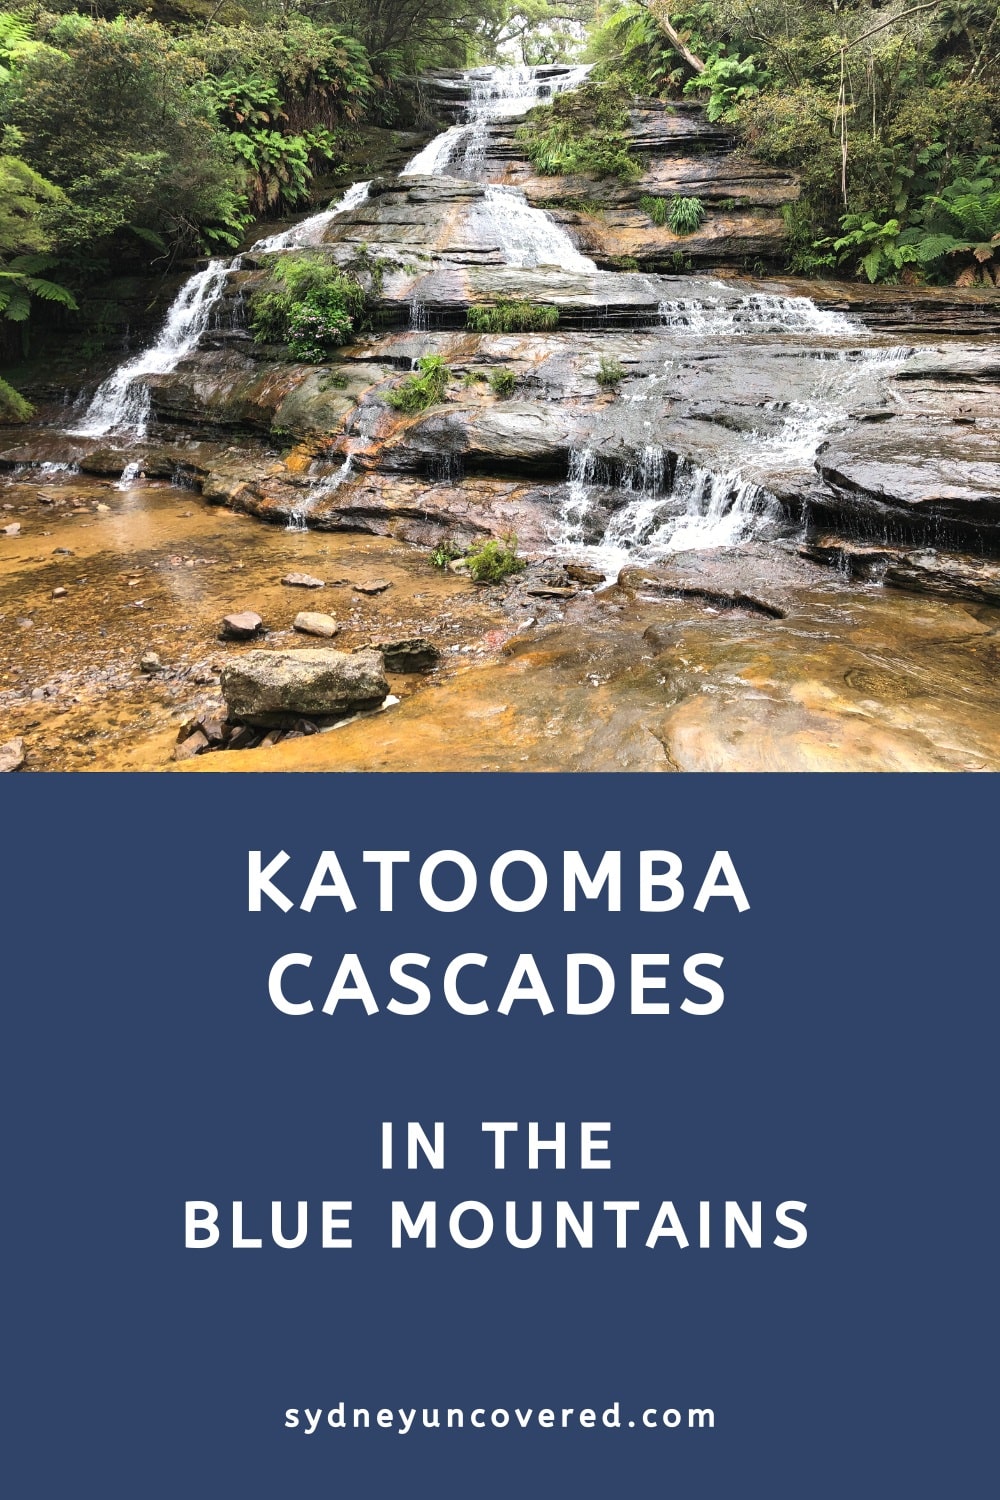 Katoomba Cascades in the Blue Mountains